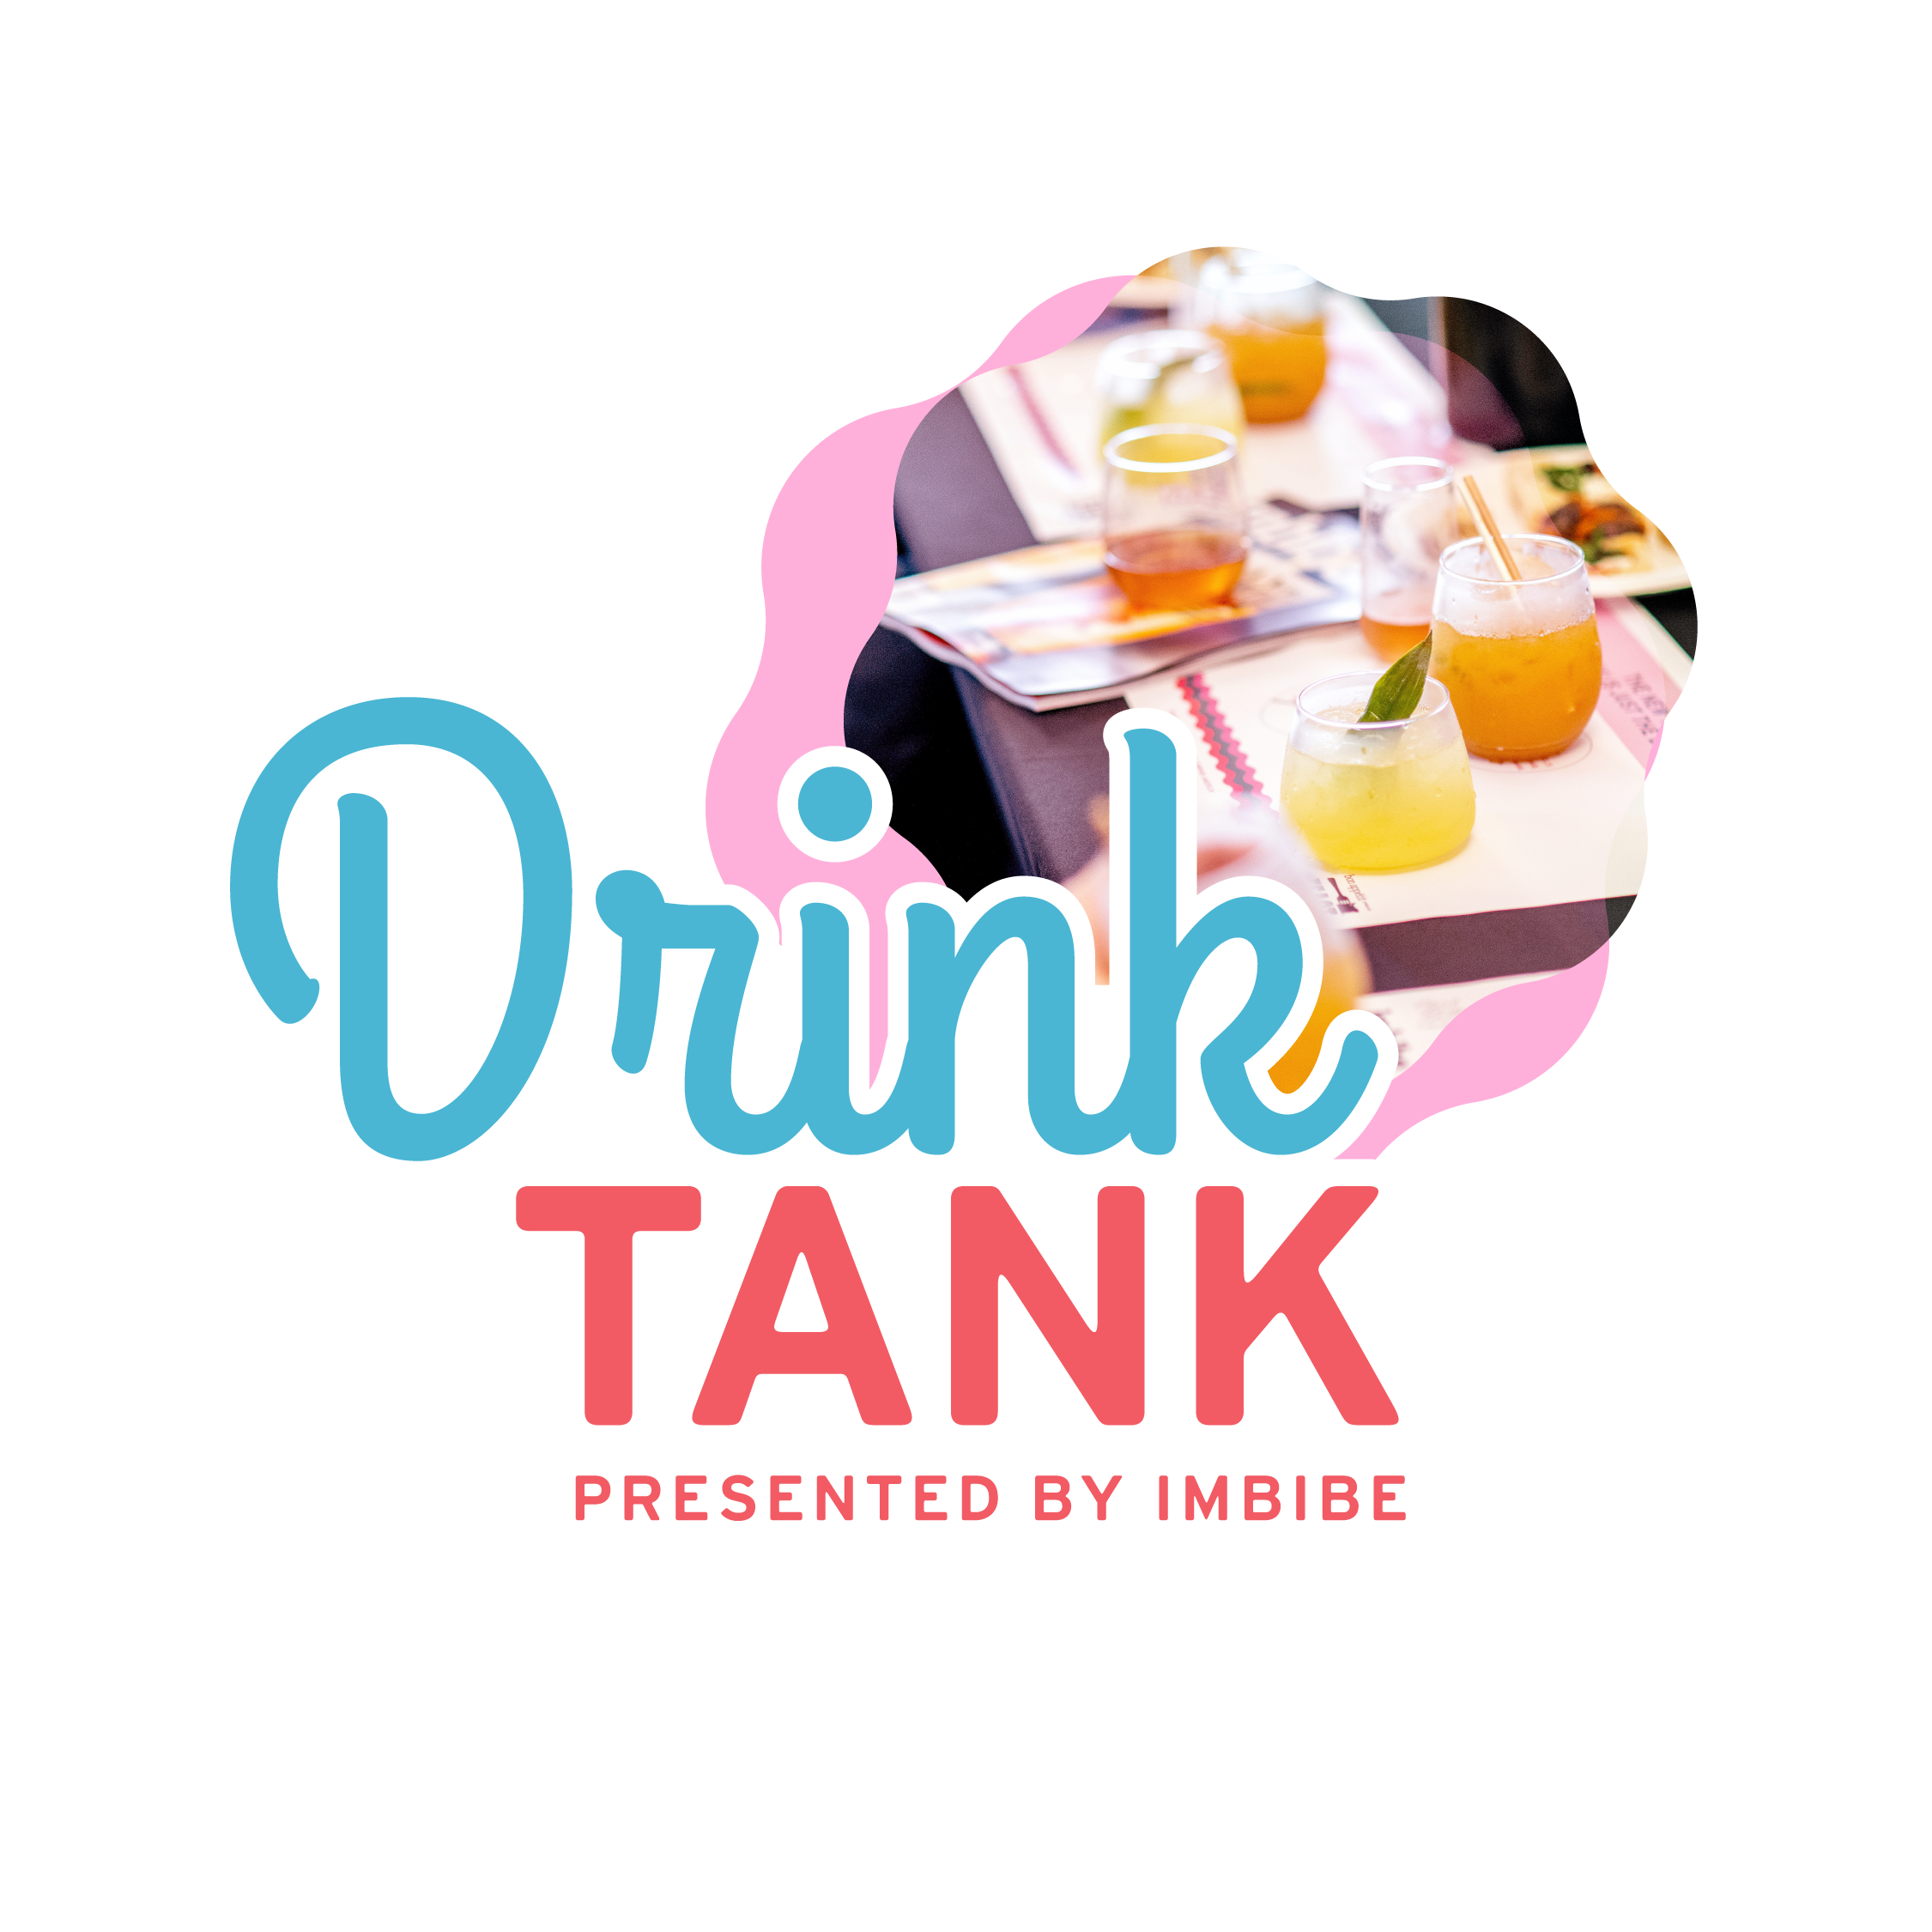 Feast Drink Tank Event ID written out with presented by Imbibe tag. Illustration is in front of an image of colorful cocktails on a table